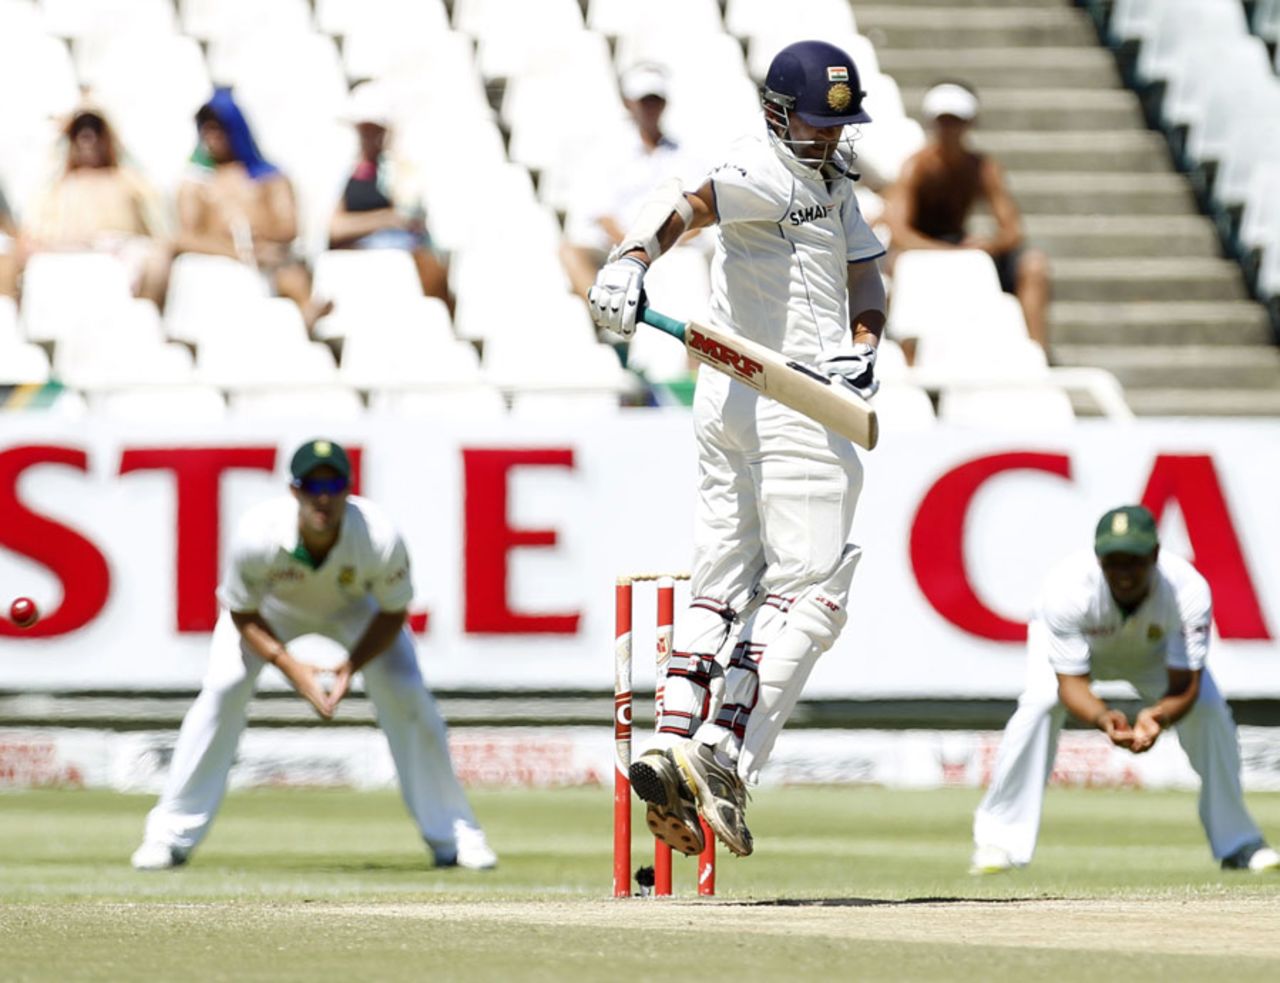 Gautam Gambhir jumps as he defends a short ball, South Africa v India, 3rd Test, Cape Town, 5th day, January 6, 2011